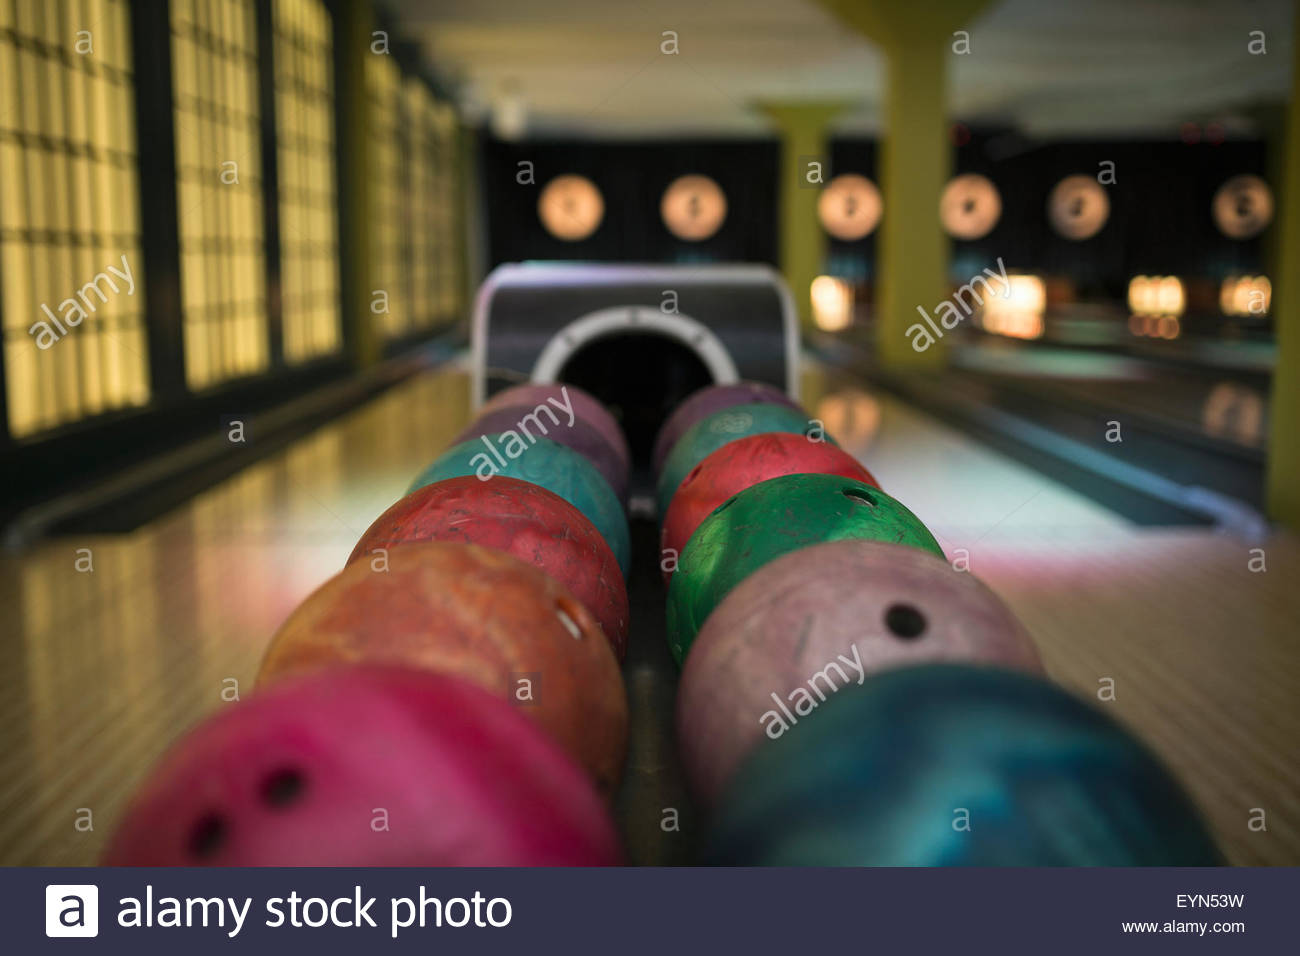 Multicolor bowling balls on rack at bowling alley Stock Photo